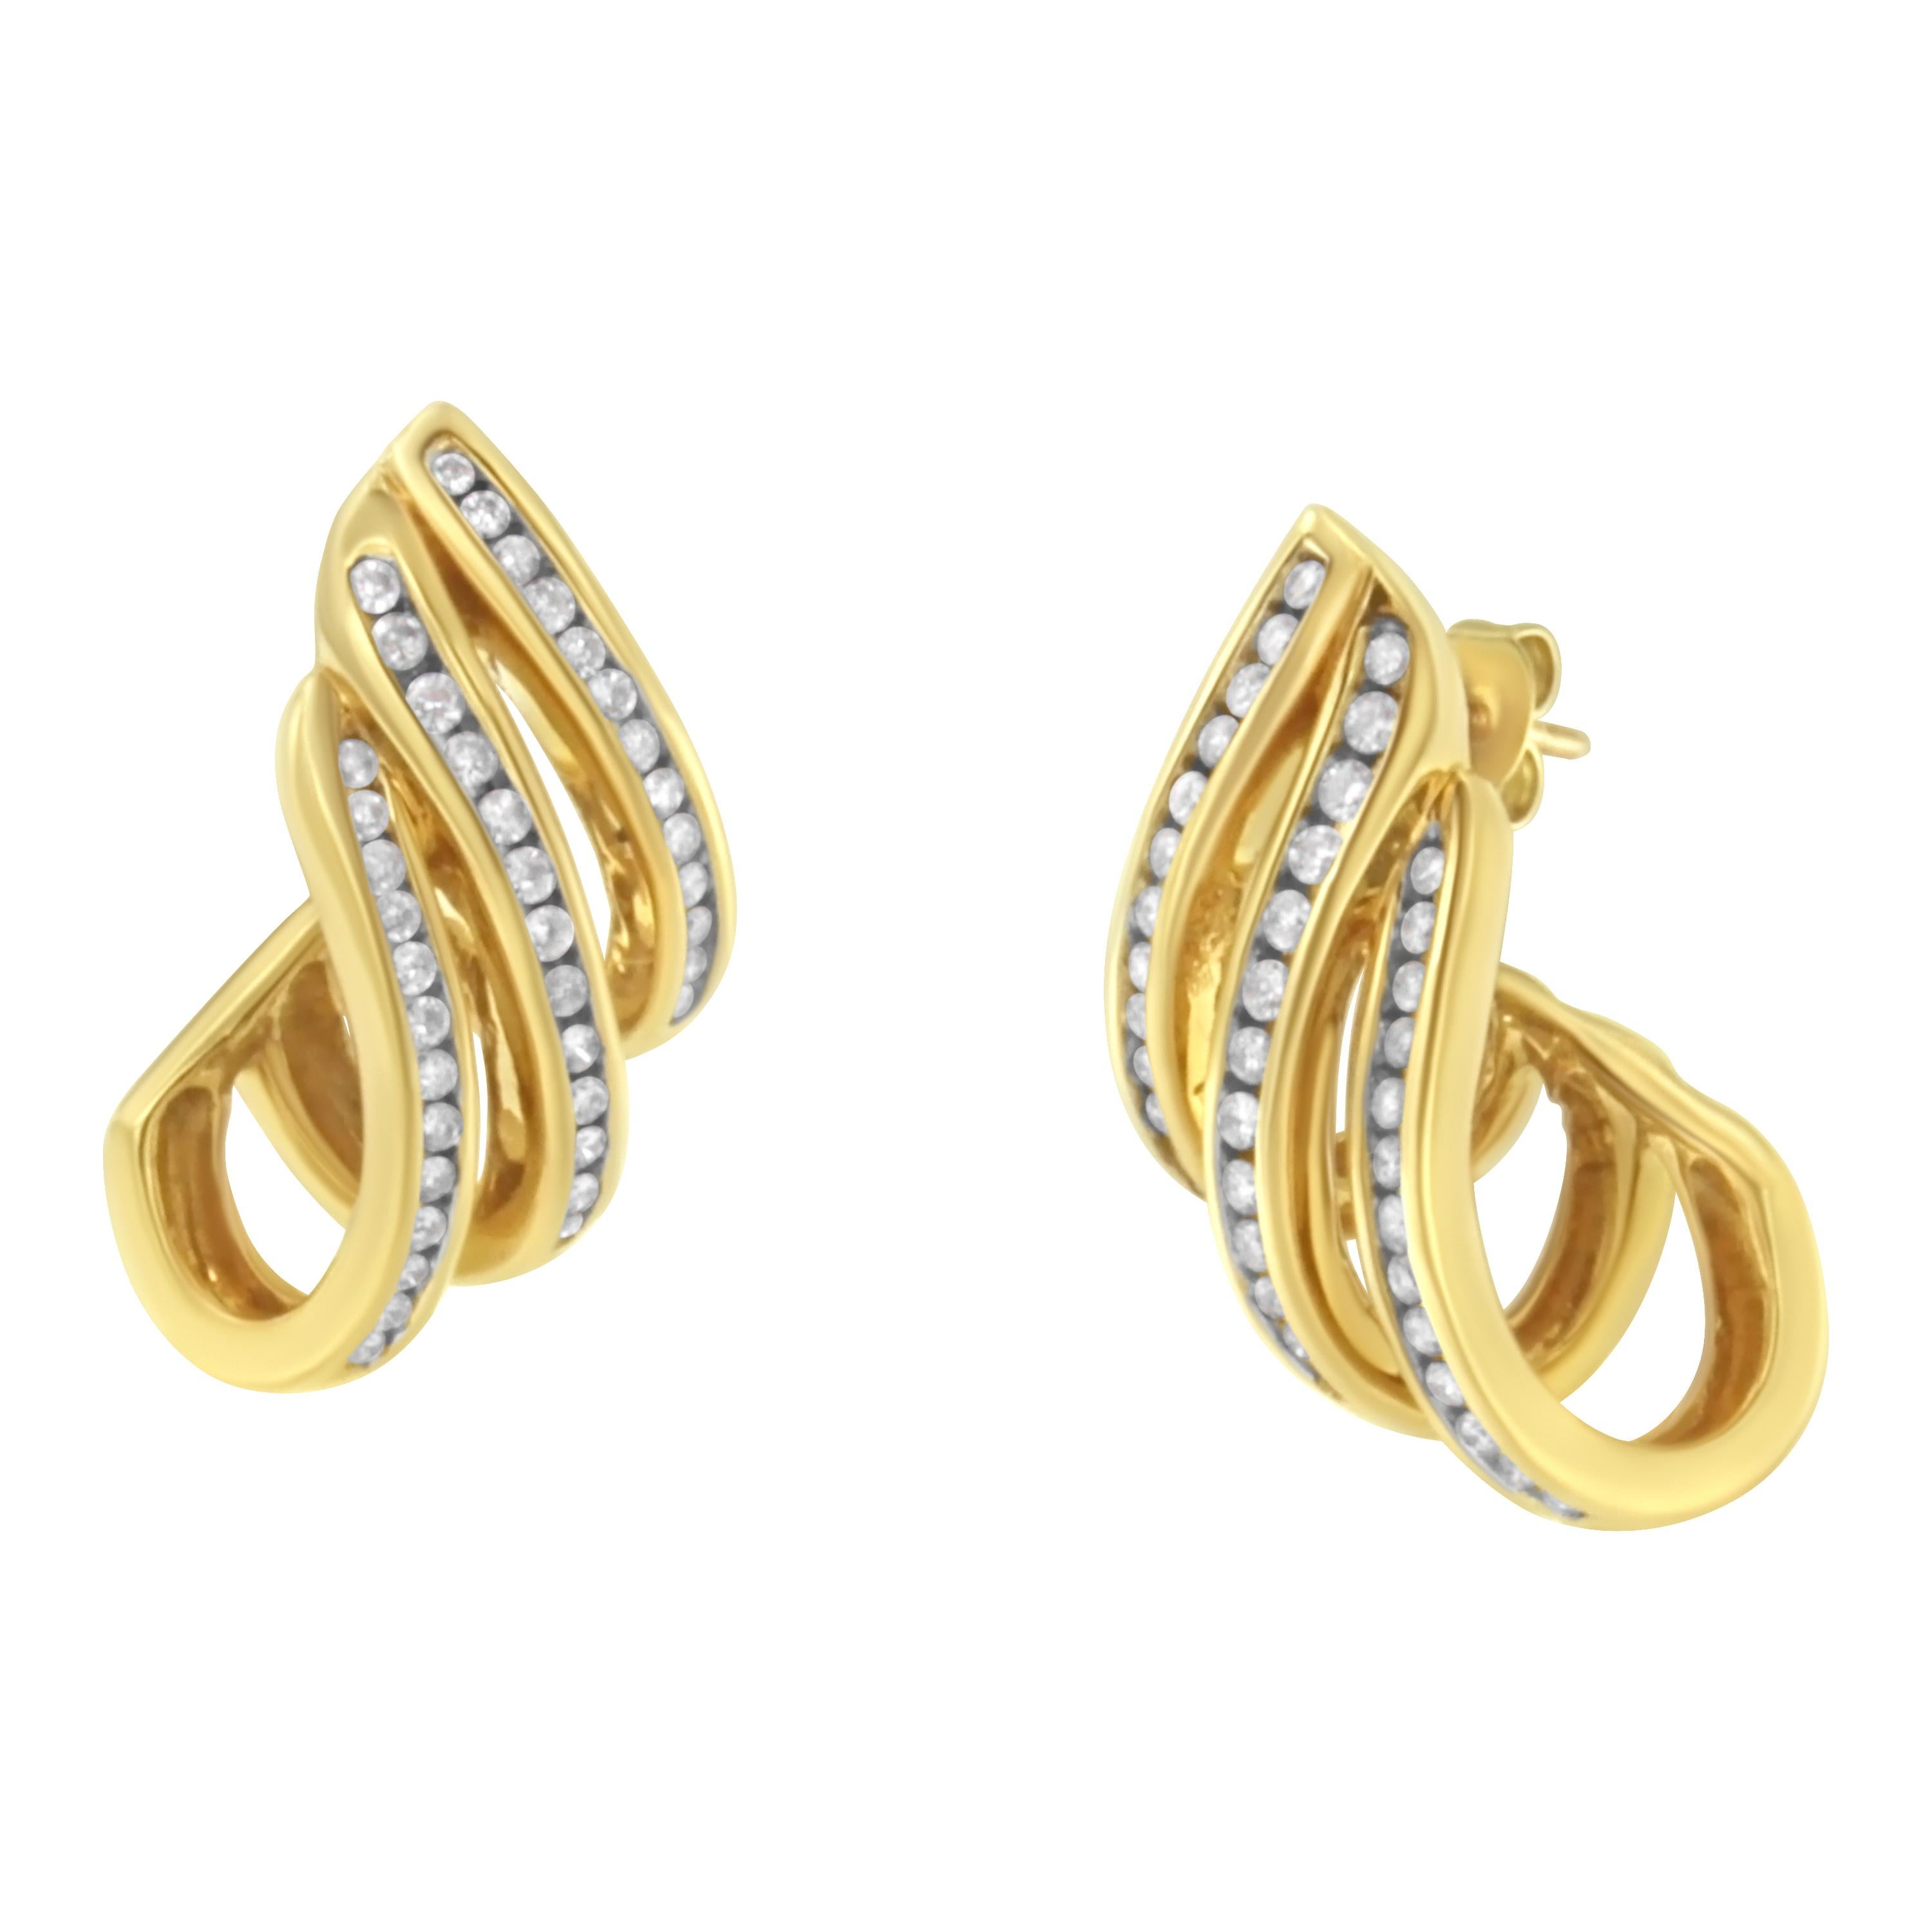 You will fall in love with these unique fan shaped multi ribbon open hoop earrings. A must have for any serious jewelry collection, these 10K yellow gold earrings boast 1.0 carat total weight worth of diamonds with 78 individual stones. The hoops